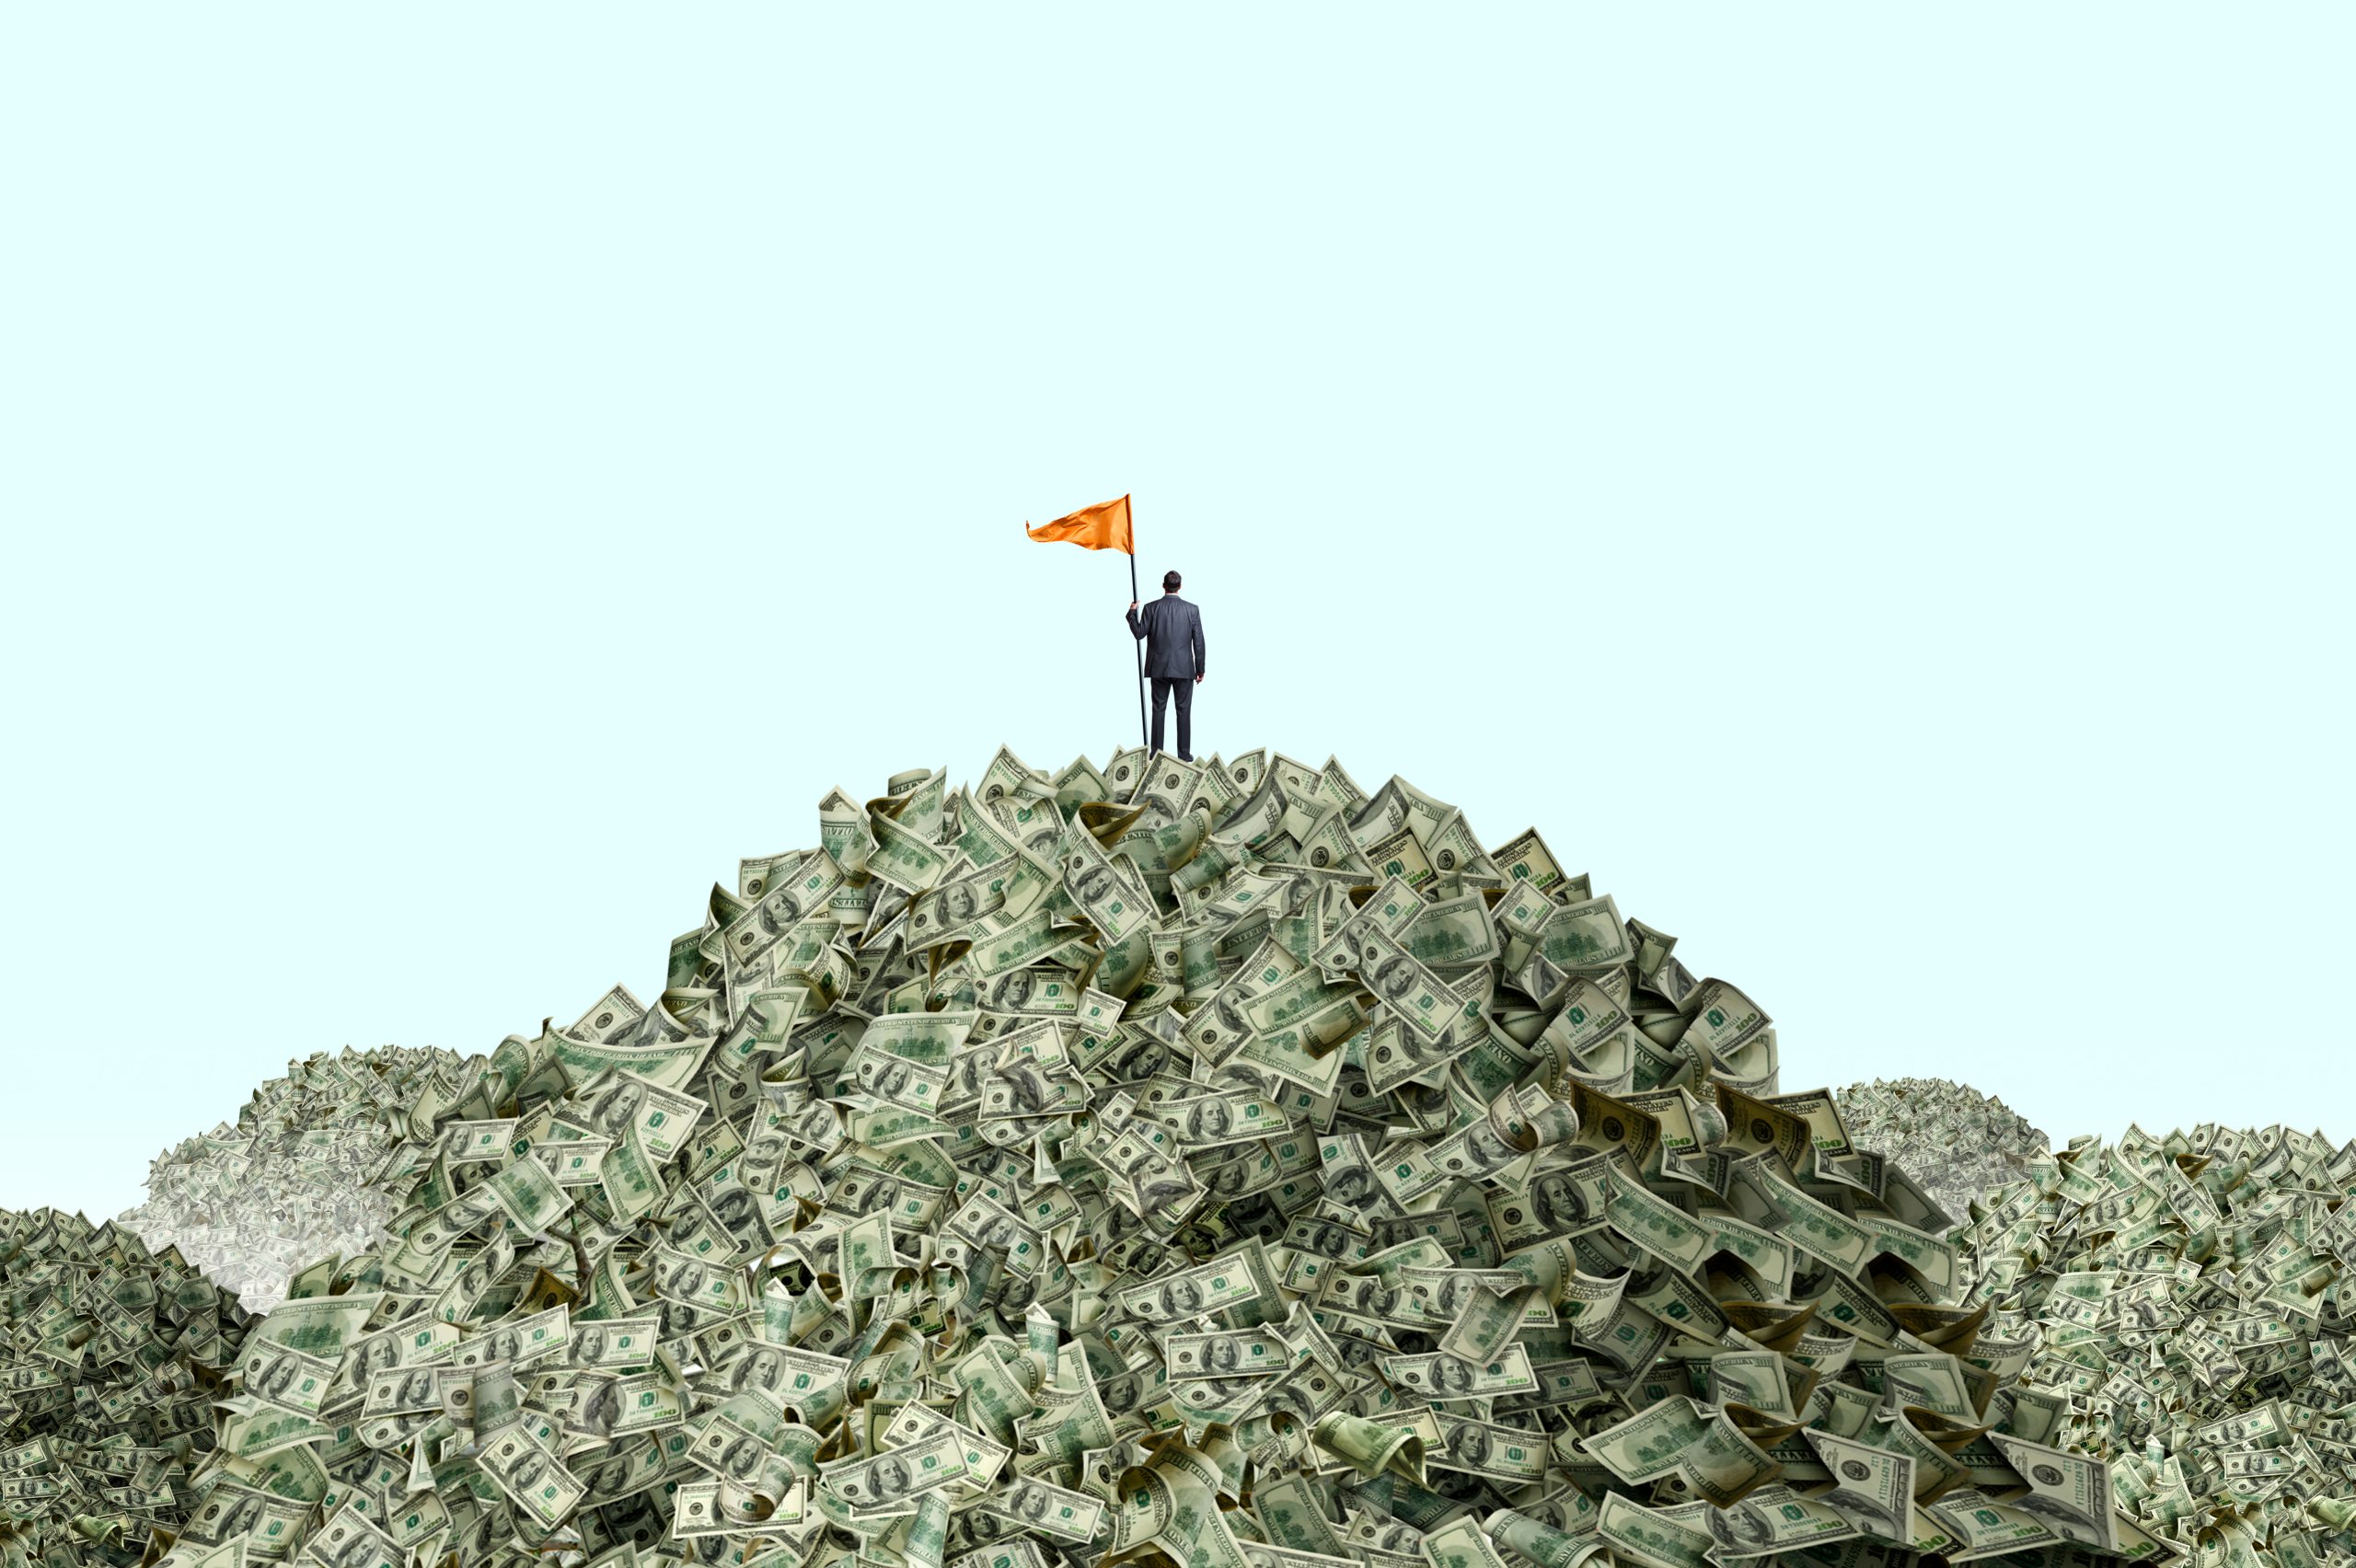 Image shows huge mounds of money, one of which has a man in a suit on top of it planting a flag.